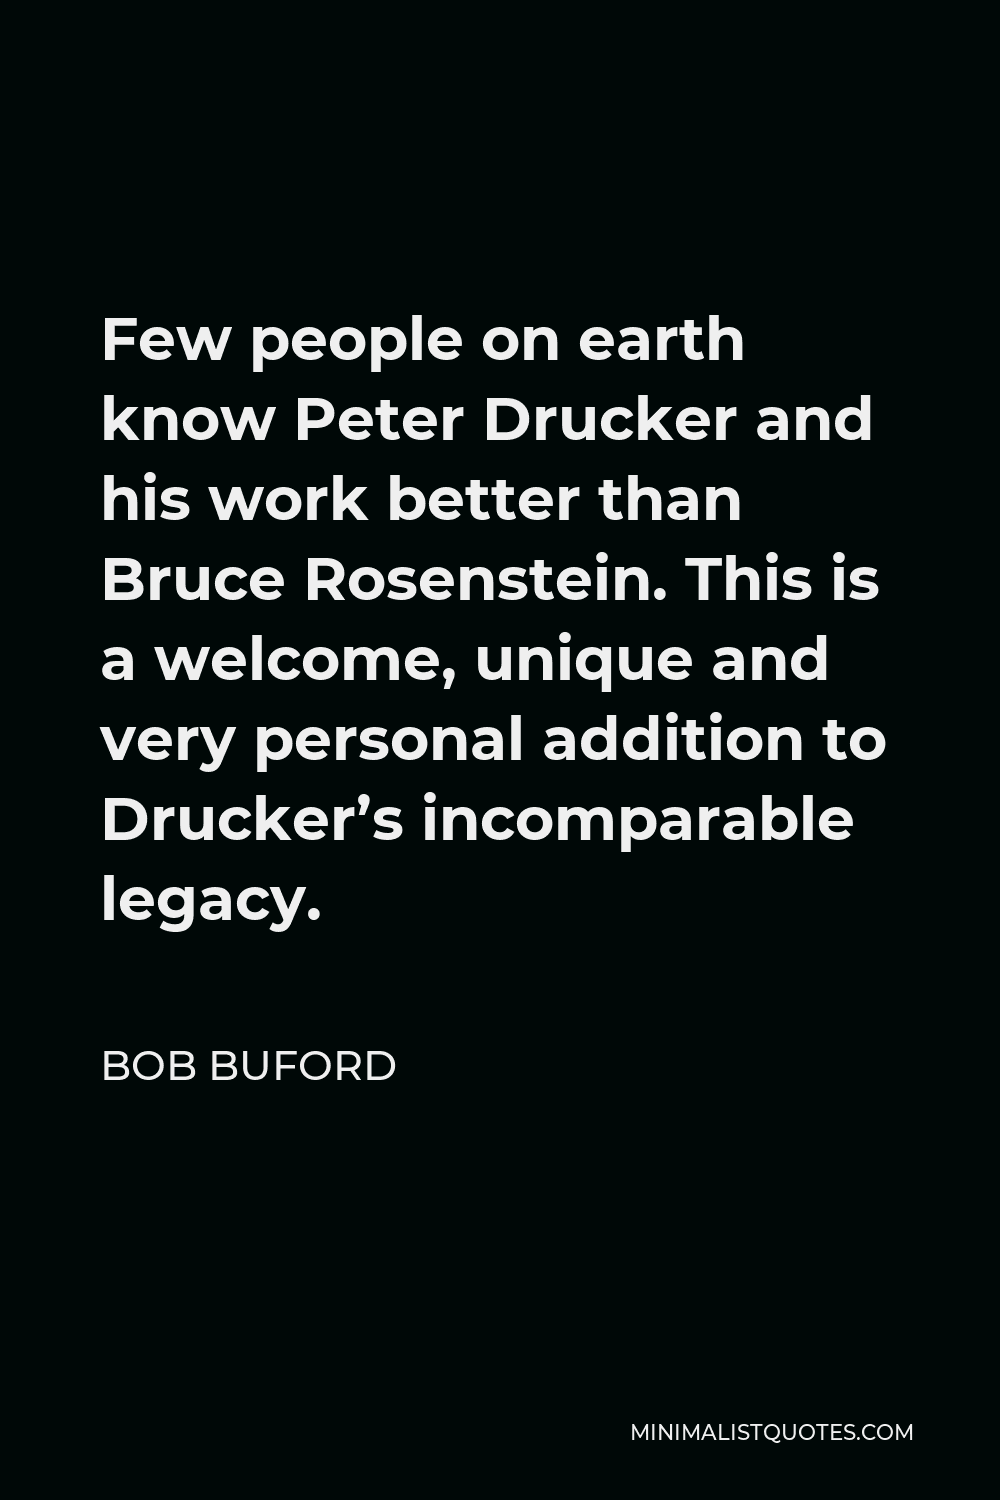 Bob Buford Quote - Few people on earth know Peter Drucker and his work better than Bruce Rosenstein. This is a welcome, unique and very personal addition to Drucker’s incomparable legacy.